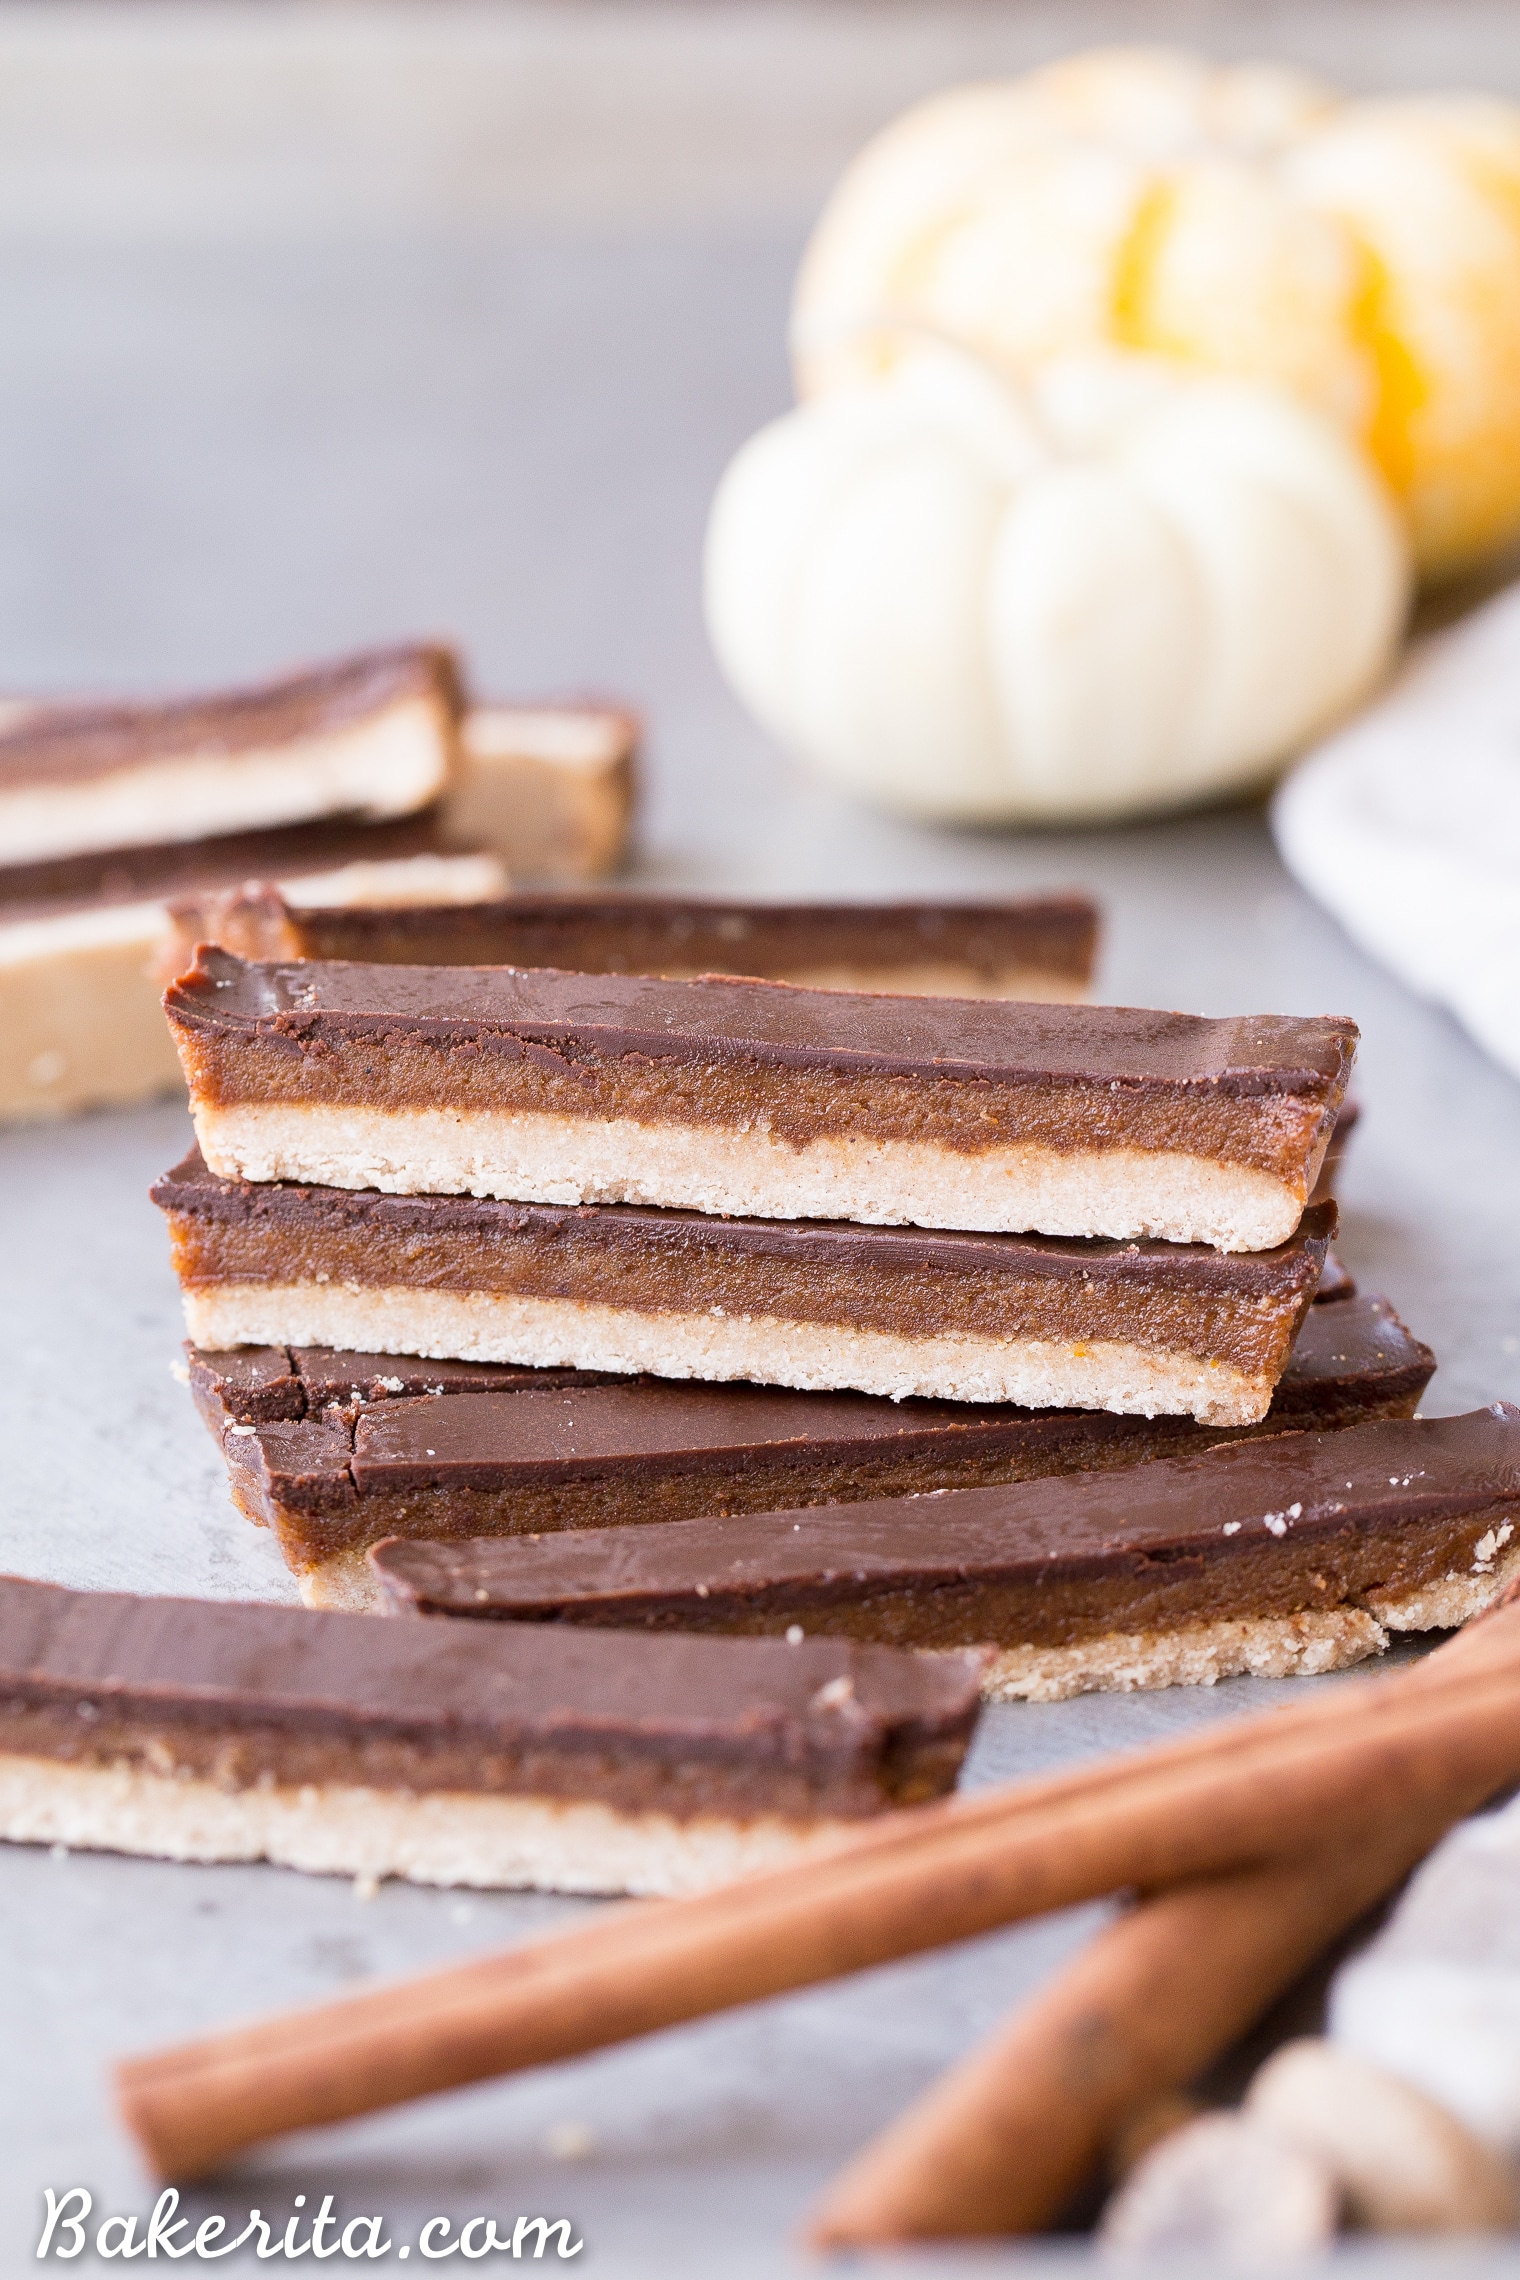 These Pumpkin Spice Twix Bars are a warm, pumpkin-spiced twist on a classic candy favorite! These copycat homemade Twix Bars are gluten-free, paleo, and vegan, and the bold pumpkin spice flavors take them out of this world.